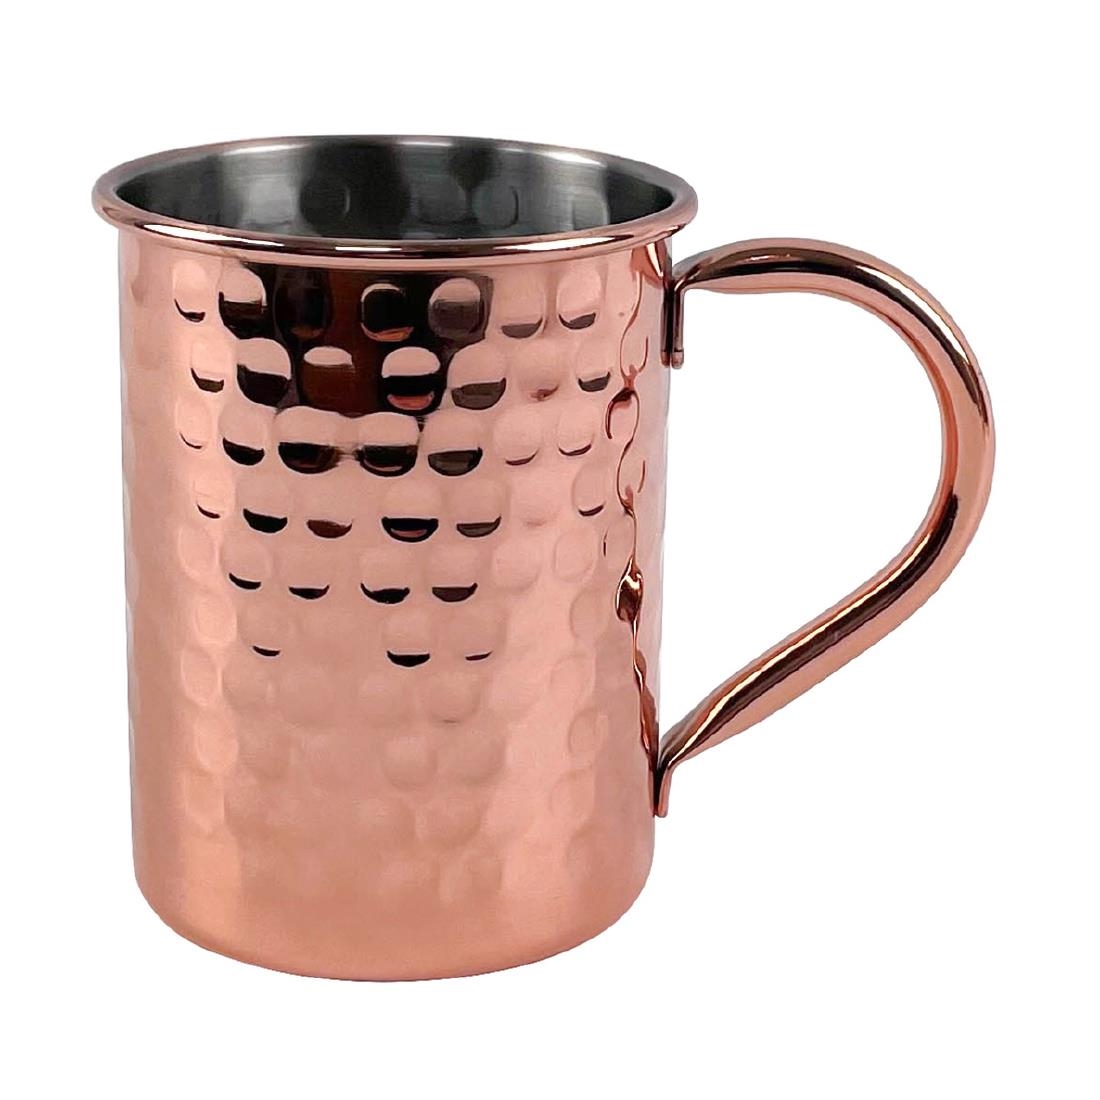 Beaumont Copper-Plated Hammered Mug 400ml (CZ664)